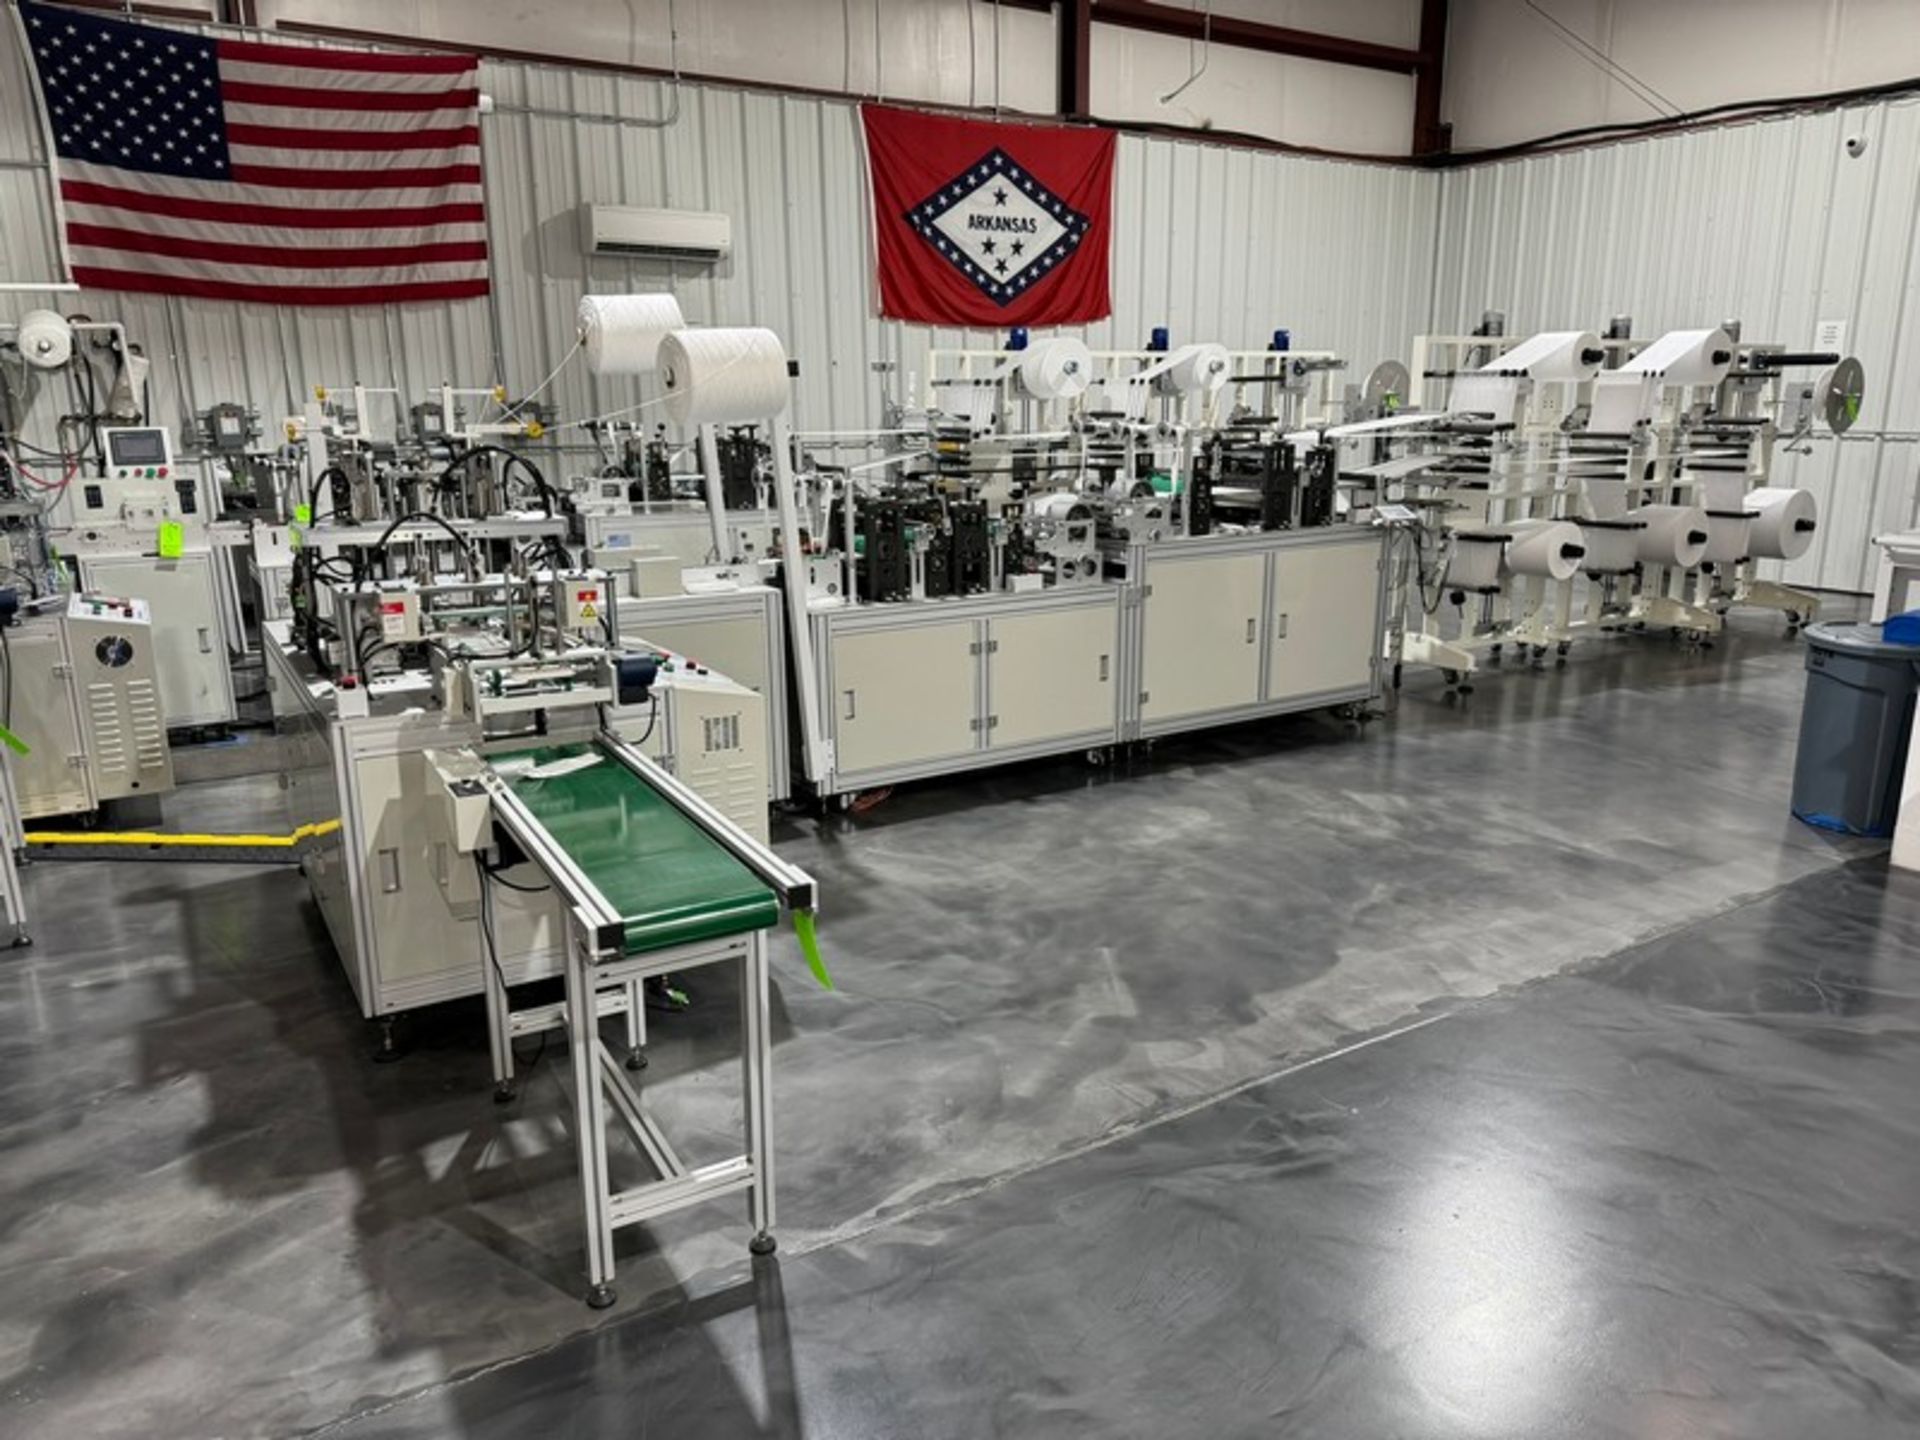 2022 KYD Automatic 6,000 Units Per Hour Mask Manufacturing Line, Includes Unwinding Station, Rolling - Image 2 of 30